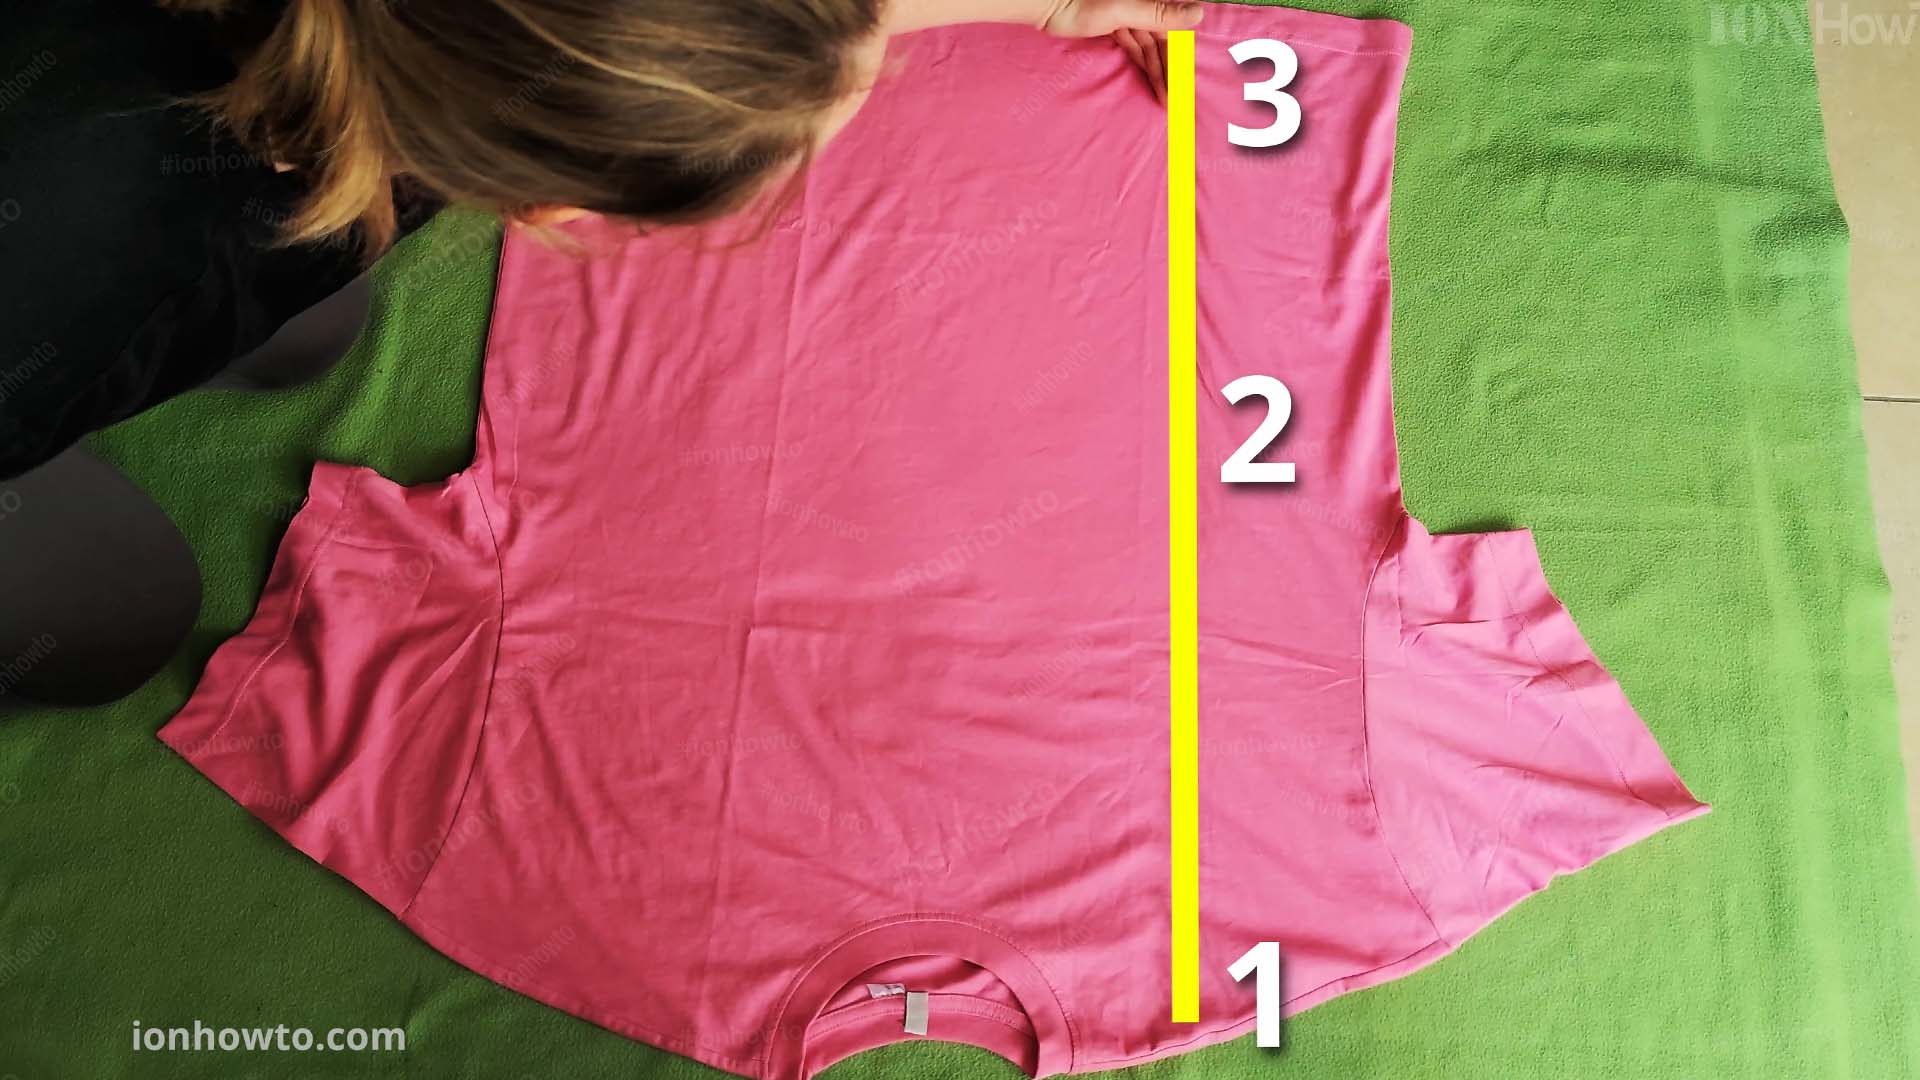 How to fold a T-Shirt in 2 seconds